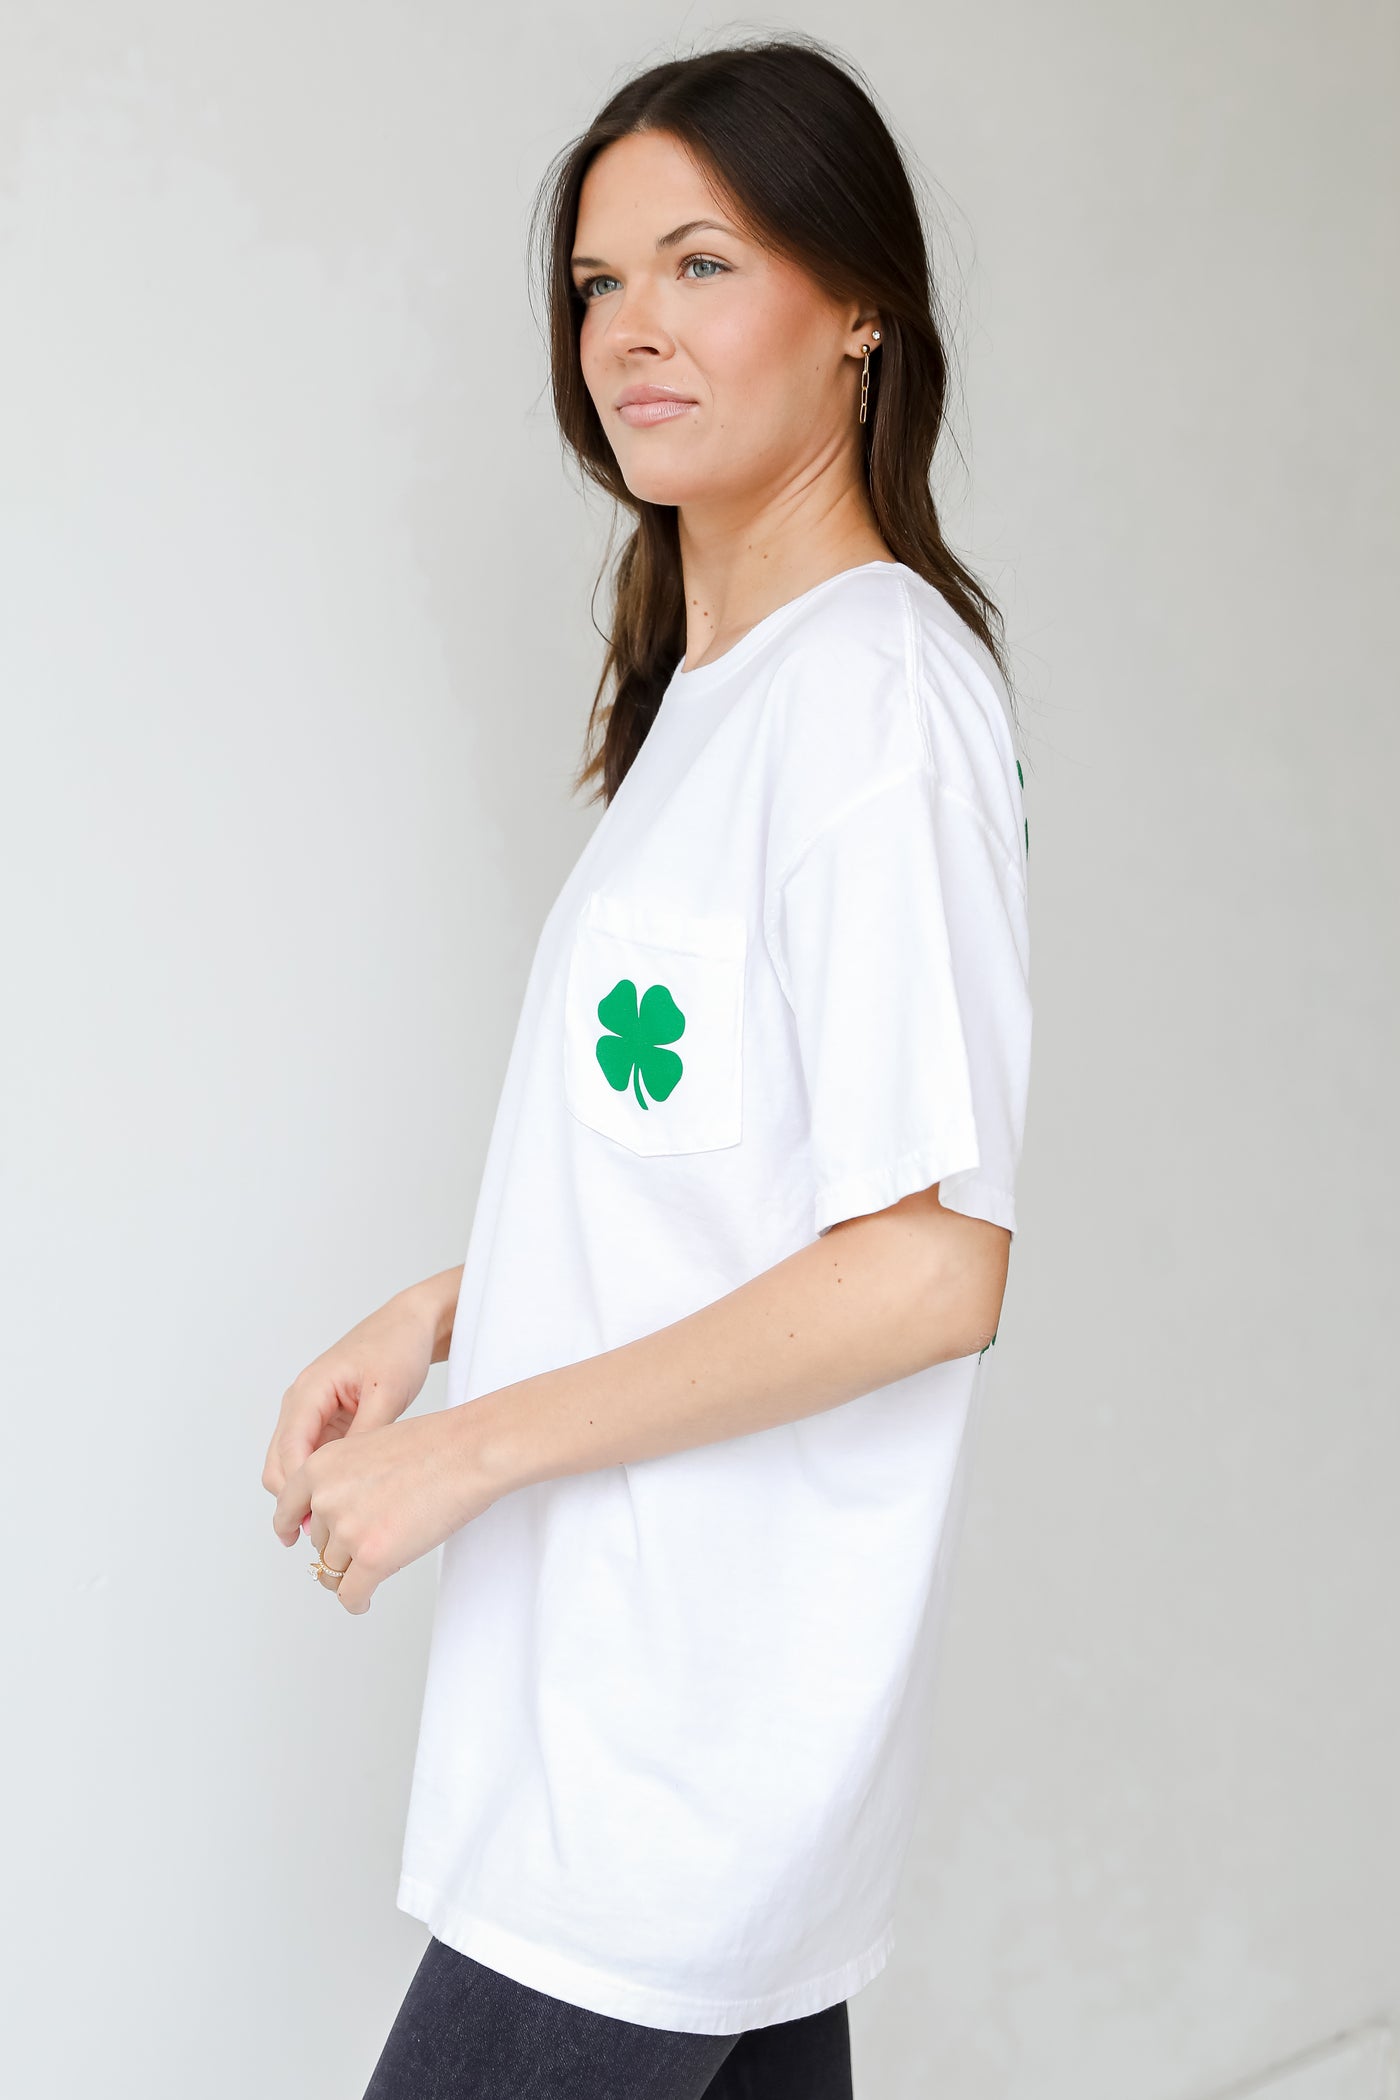 Feeling Lucky Clover Tee side view